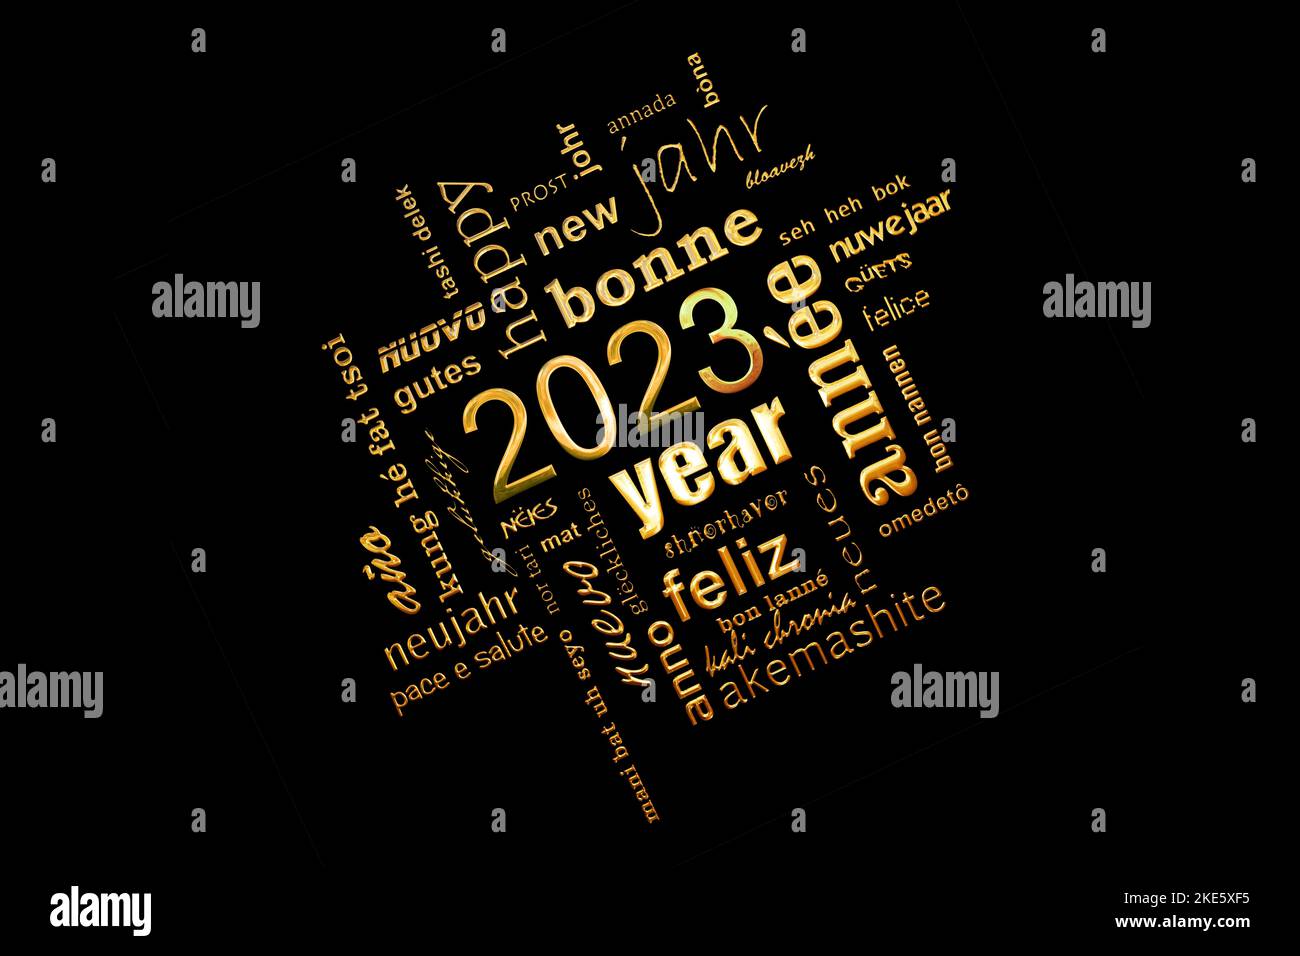 2023 new year multilingual golden text word cloud greeting card on black background Stock Photo